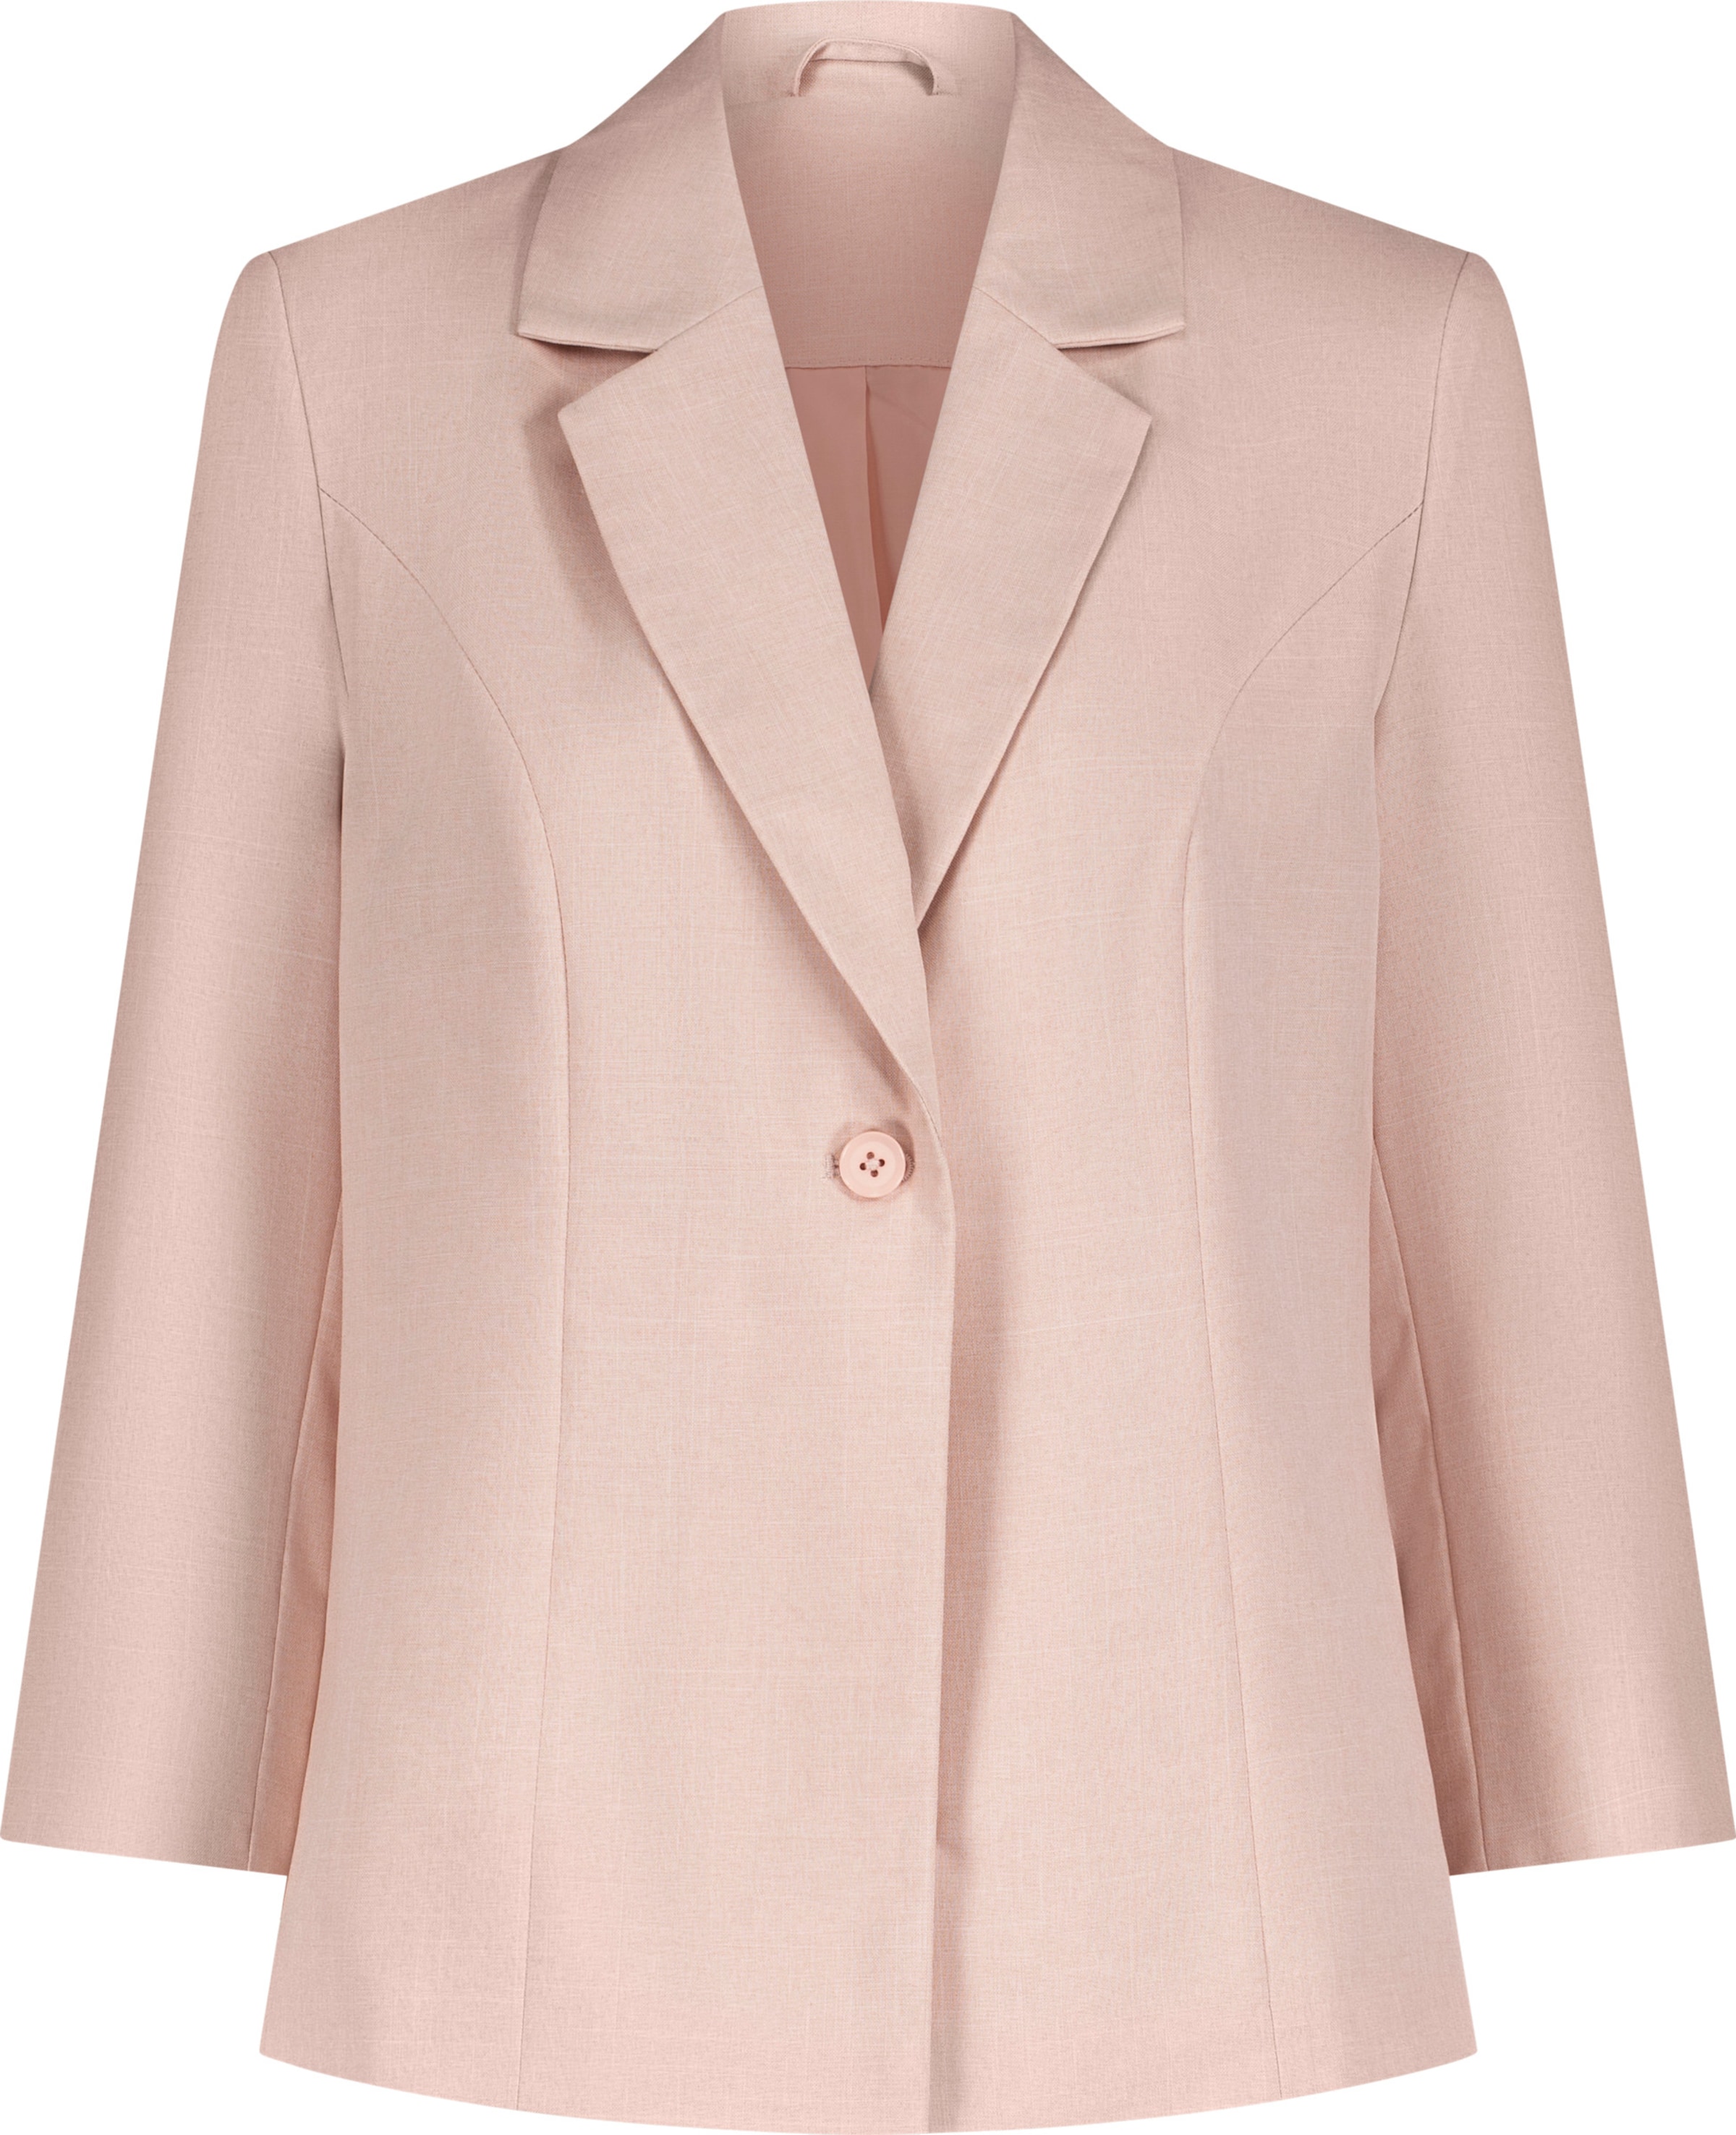 Your Look... for less! Dames Blazer poudre gemêleerd Maat